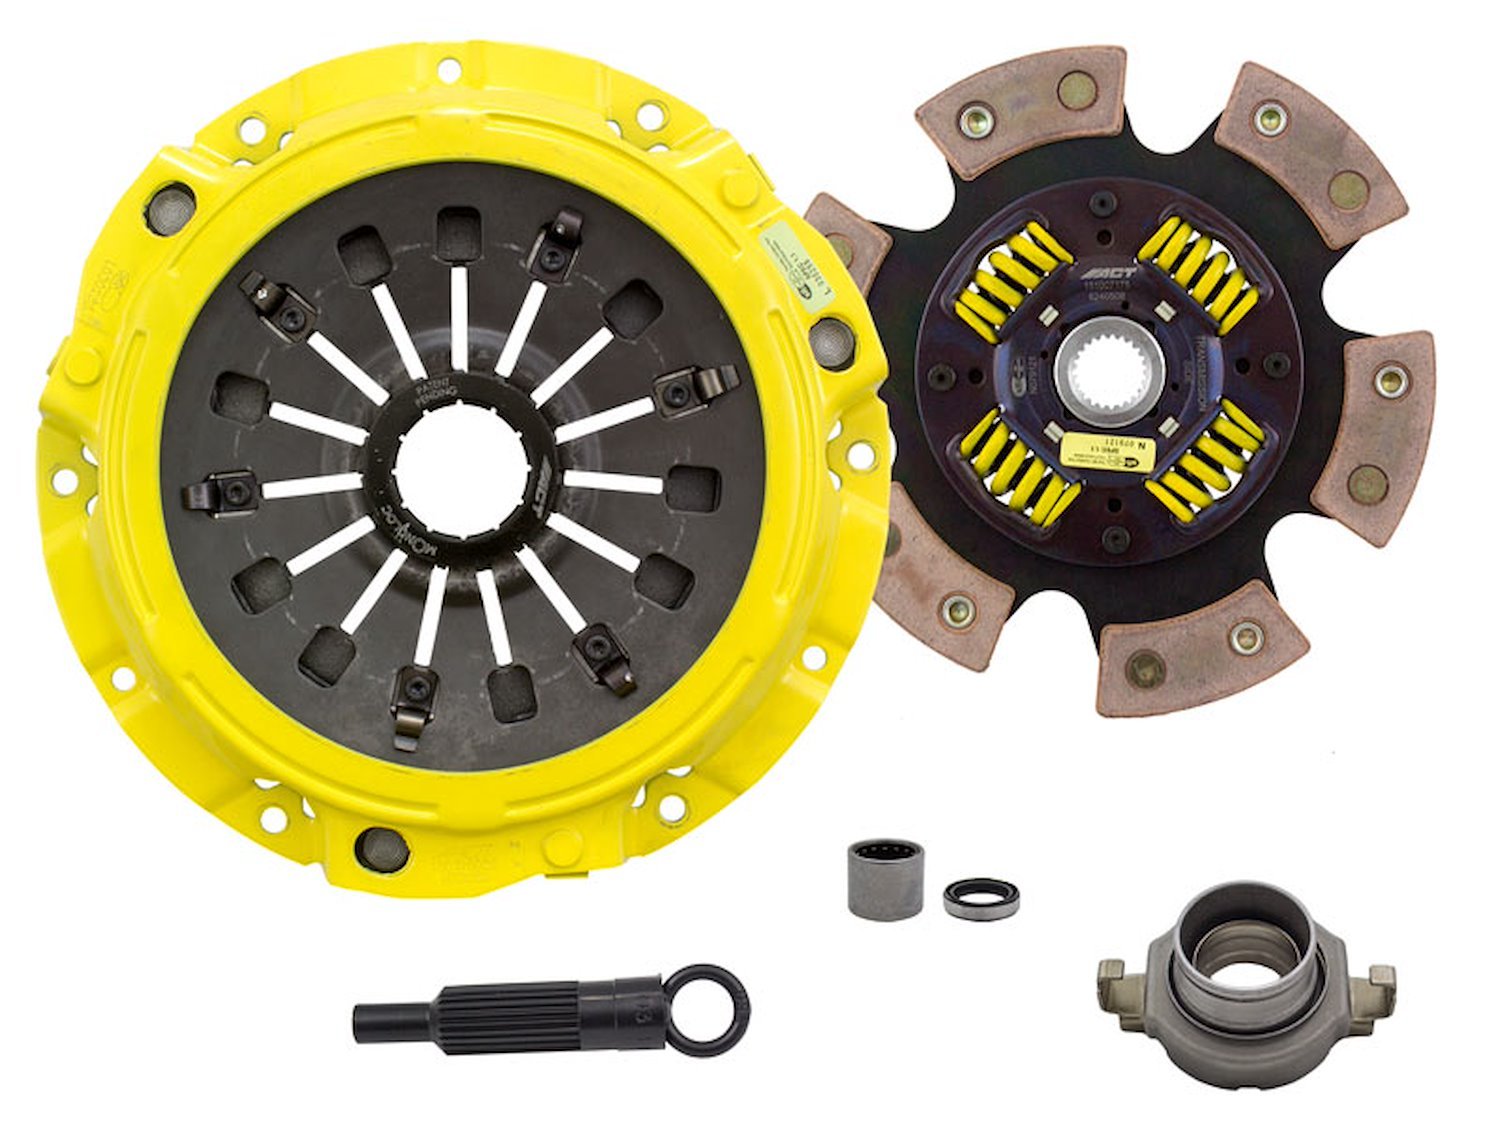 XT-M/Race Sprung 6-Pad Transmission Clutch Kit Fits Select Ford/Lincoln/Mercury/Mazda